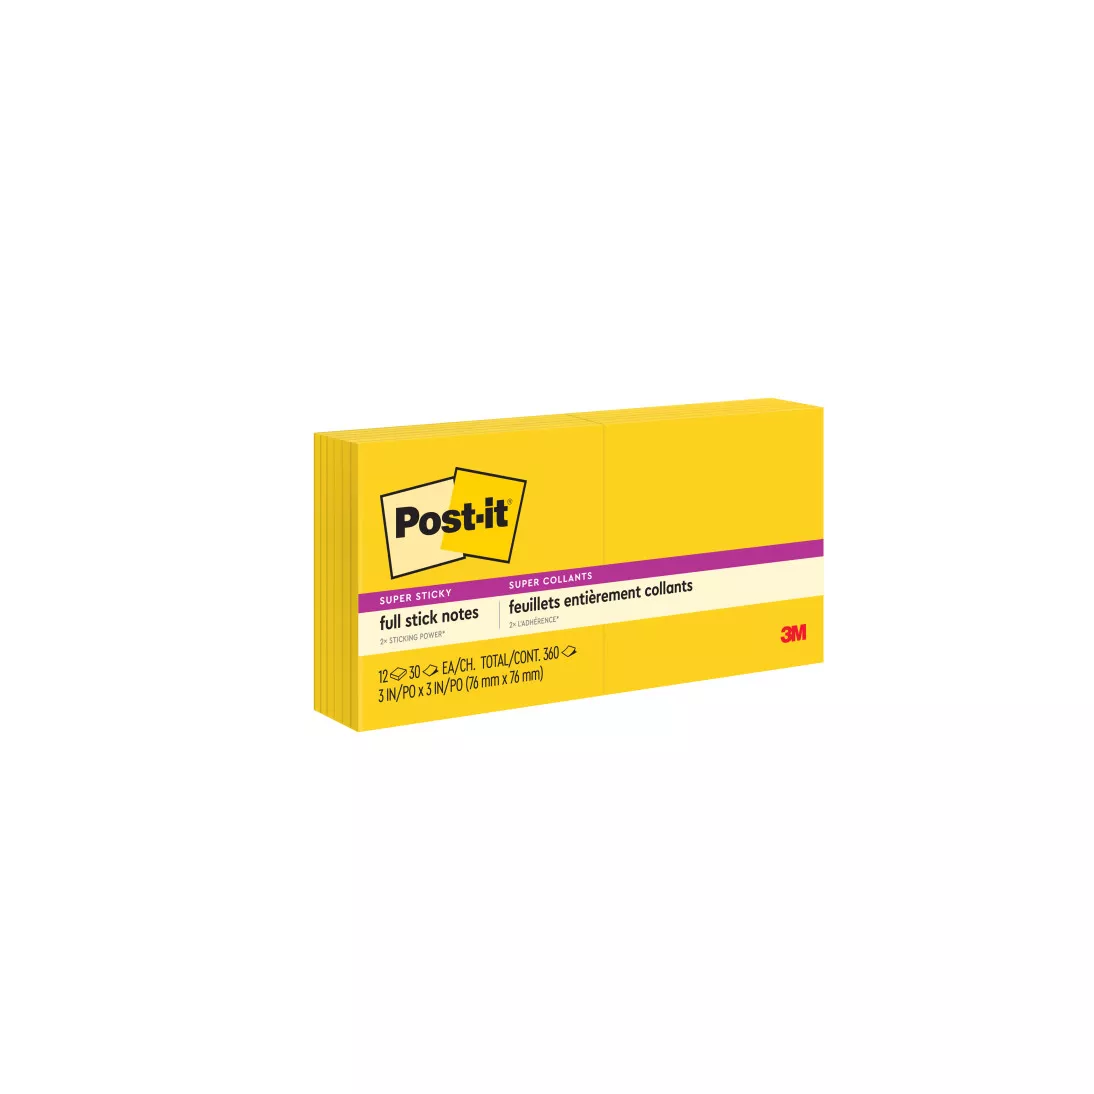 Post-it® Super Sticky Full Stick Notes F330-12SSY, 3 in x 3 in (76 mm x 76 mm), 3M Yellow